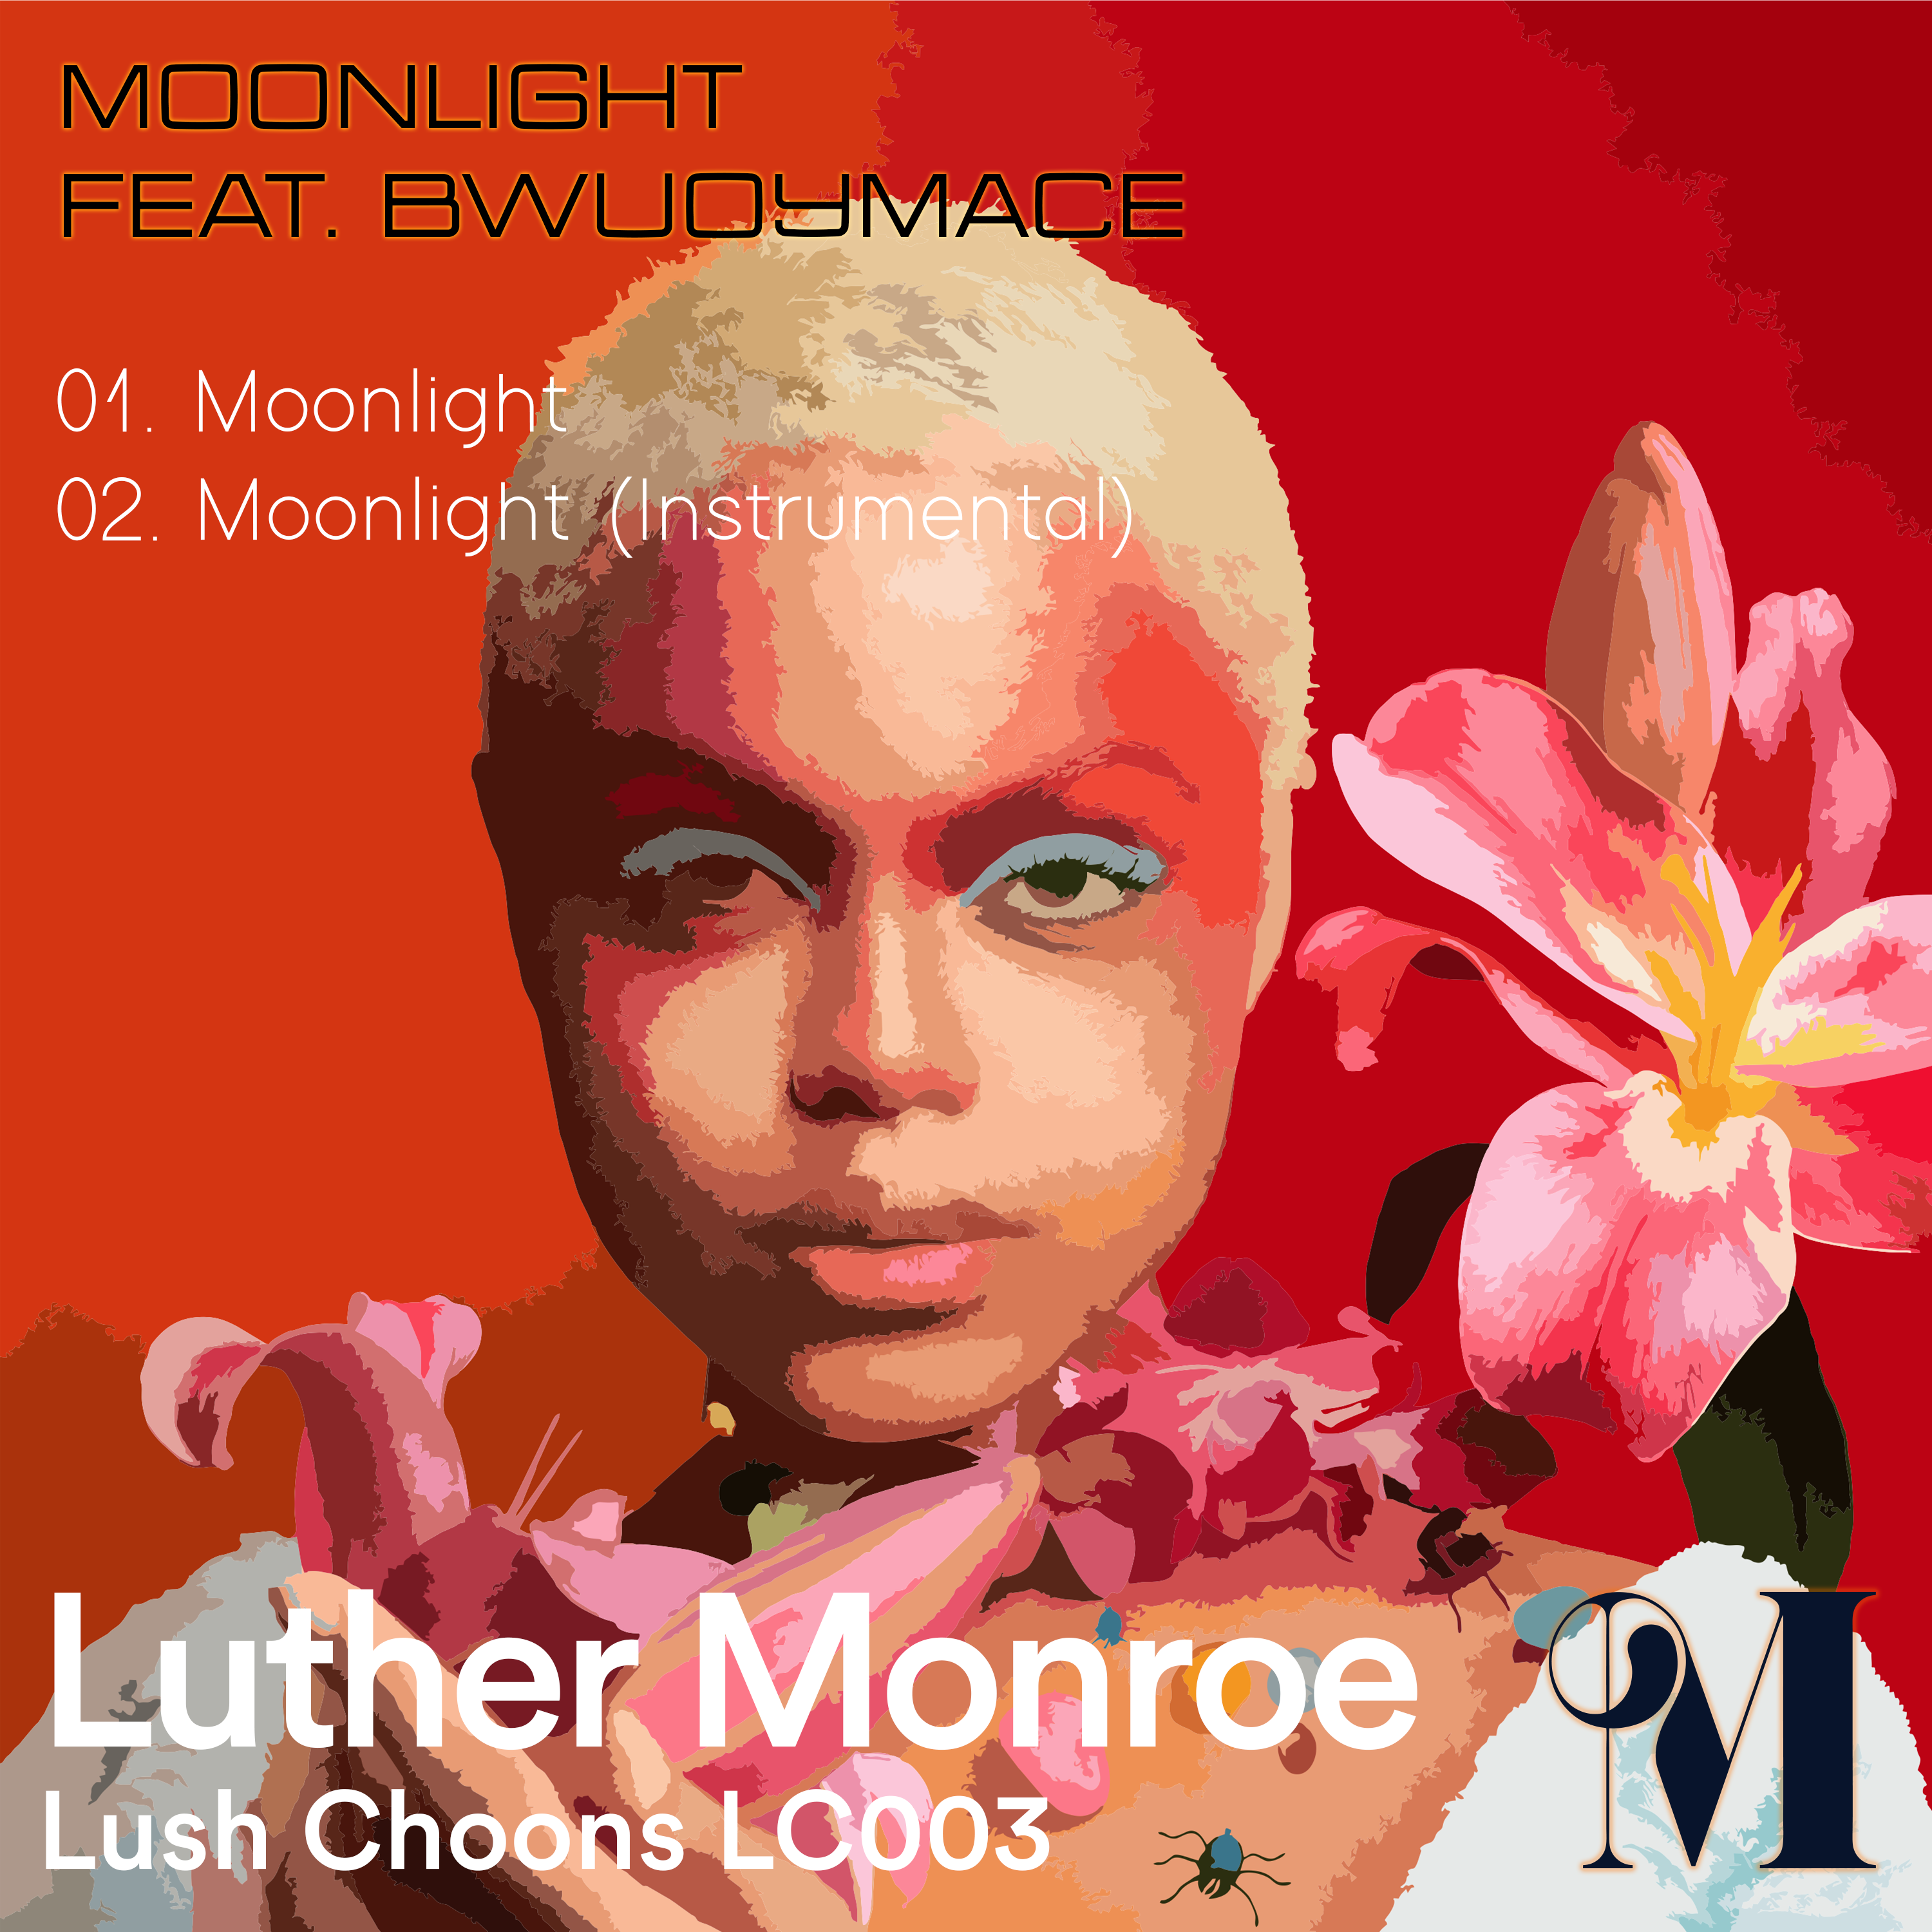 ‘Luther Monroe’ is a versatile and dynamic electronic music producer who drops groovy new Afrobeat single ‘Moonlight’.